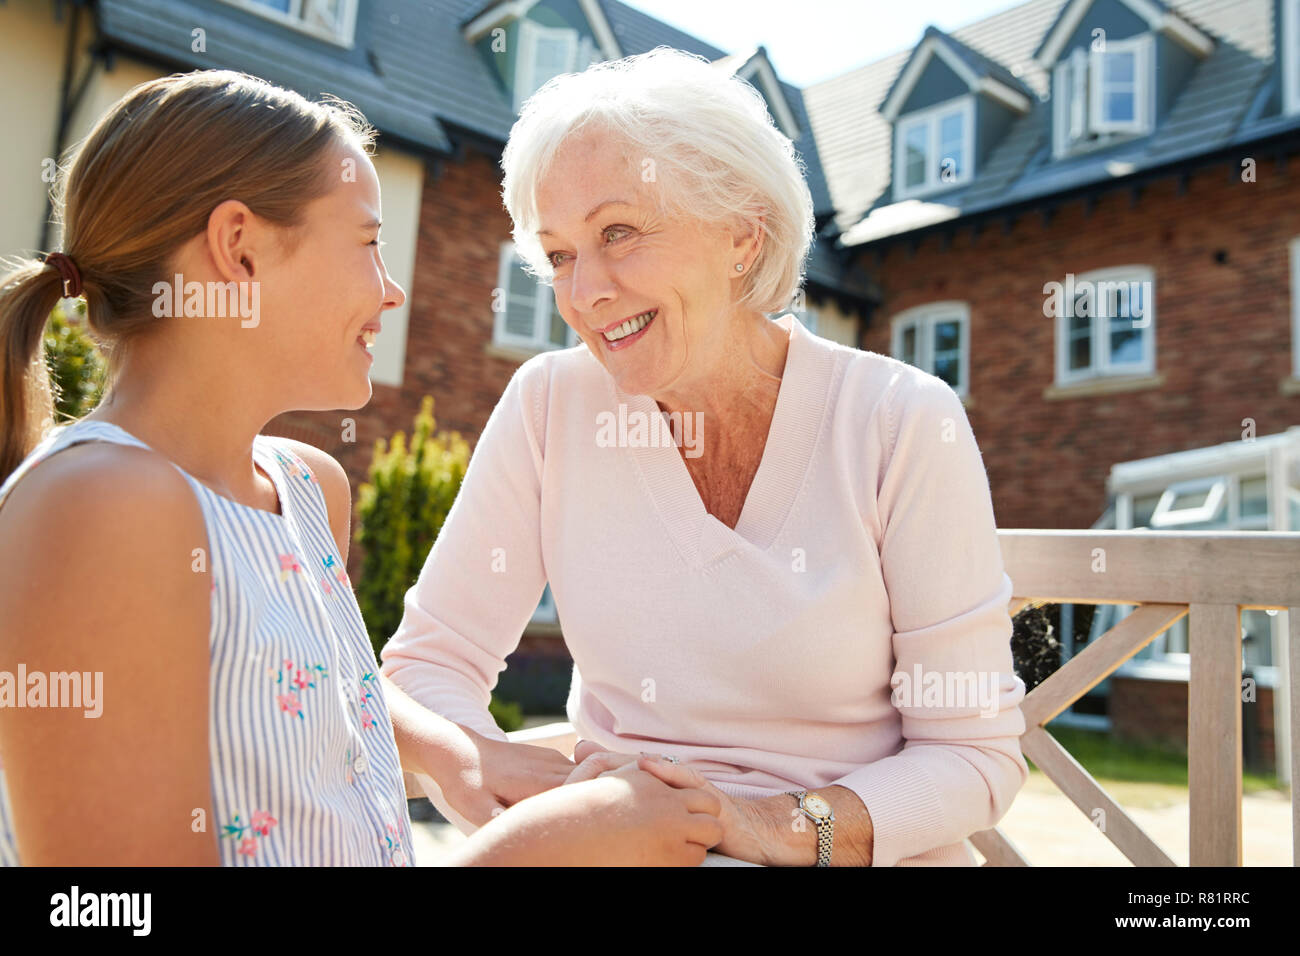 Granddaughter Sitting On Bench With Grandmother During Visit To Retirement Home Stock Photo